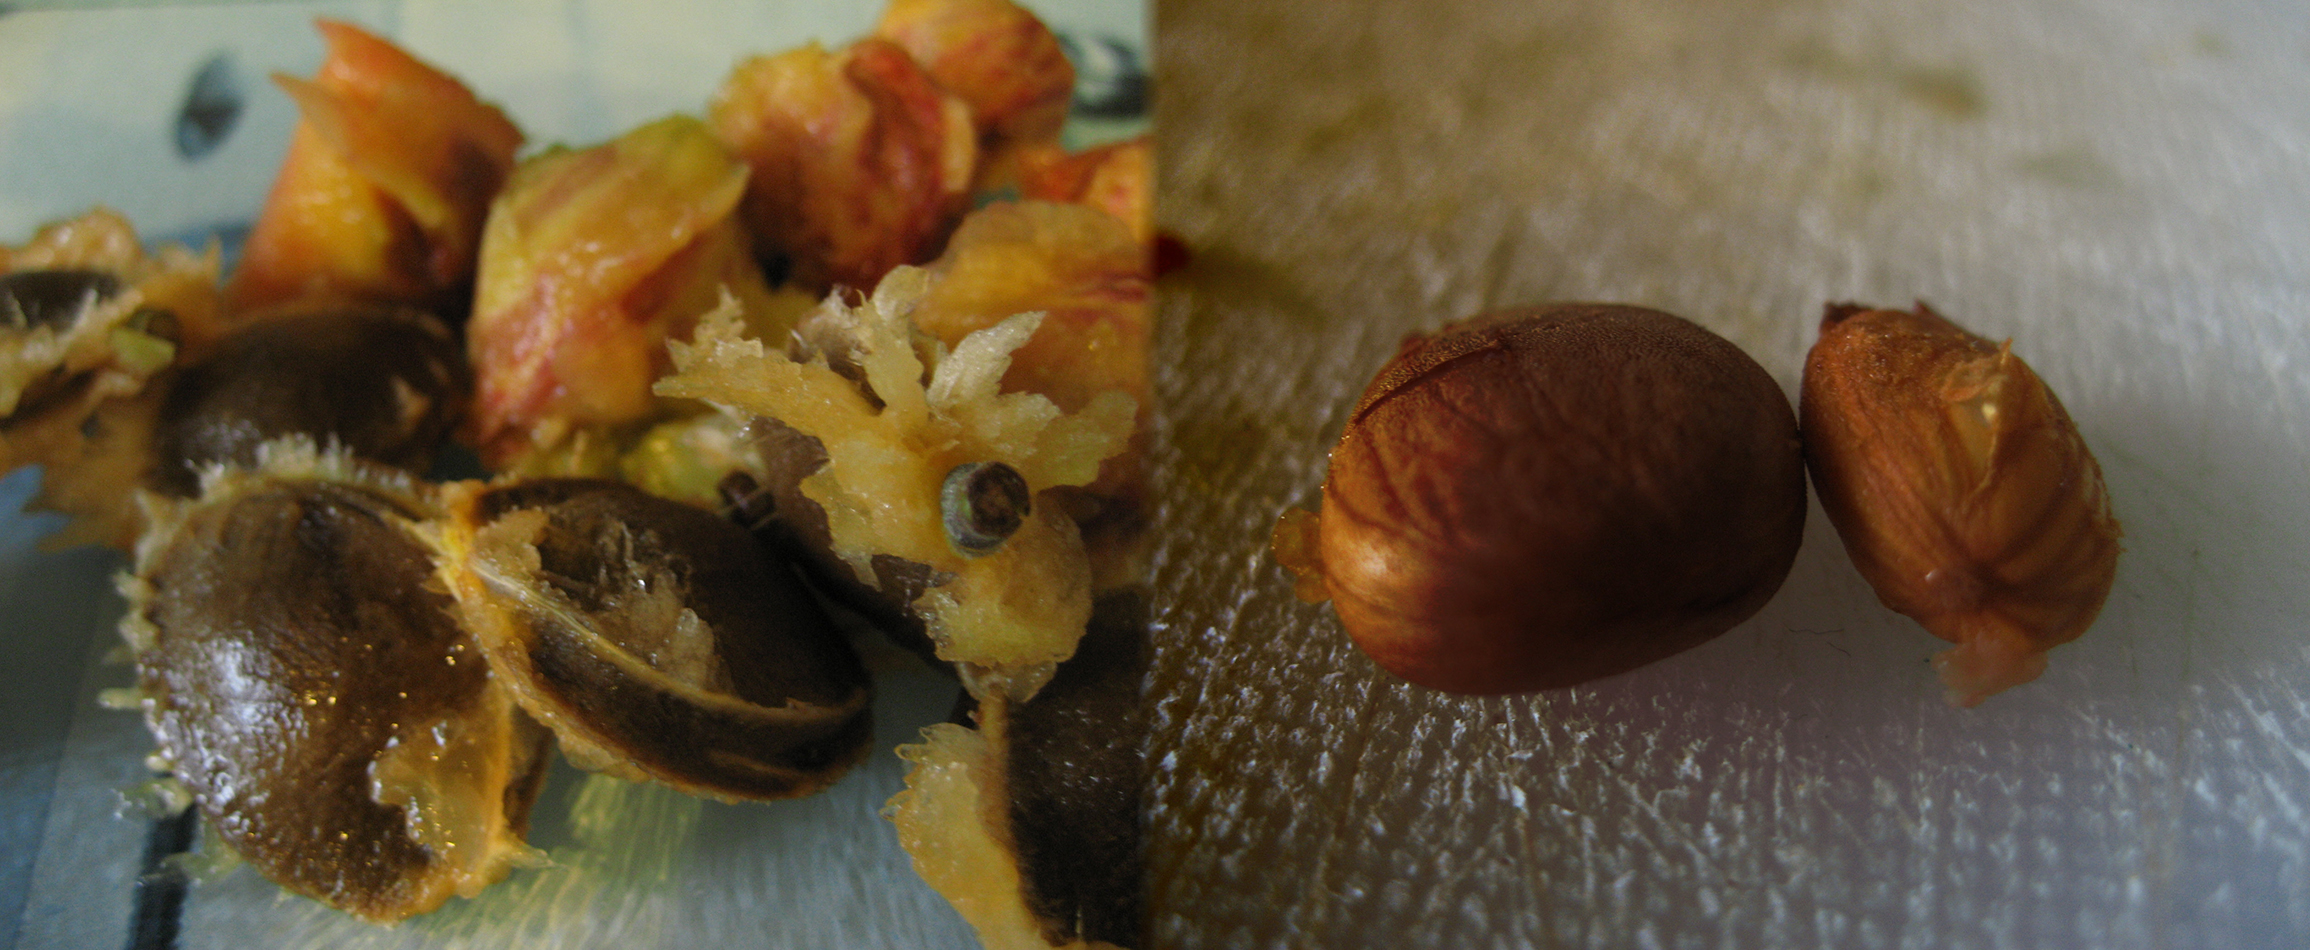 Pictured on the left are the peach and apricot stones, and on the right the kernels from inside.